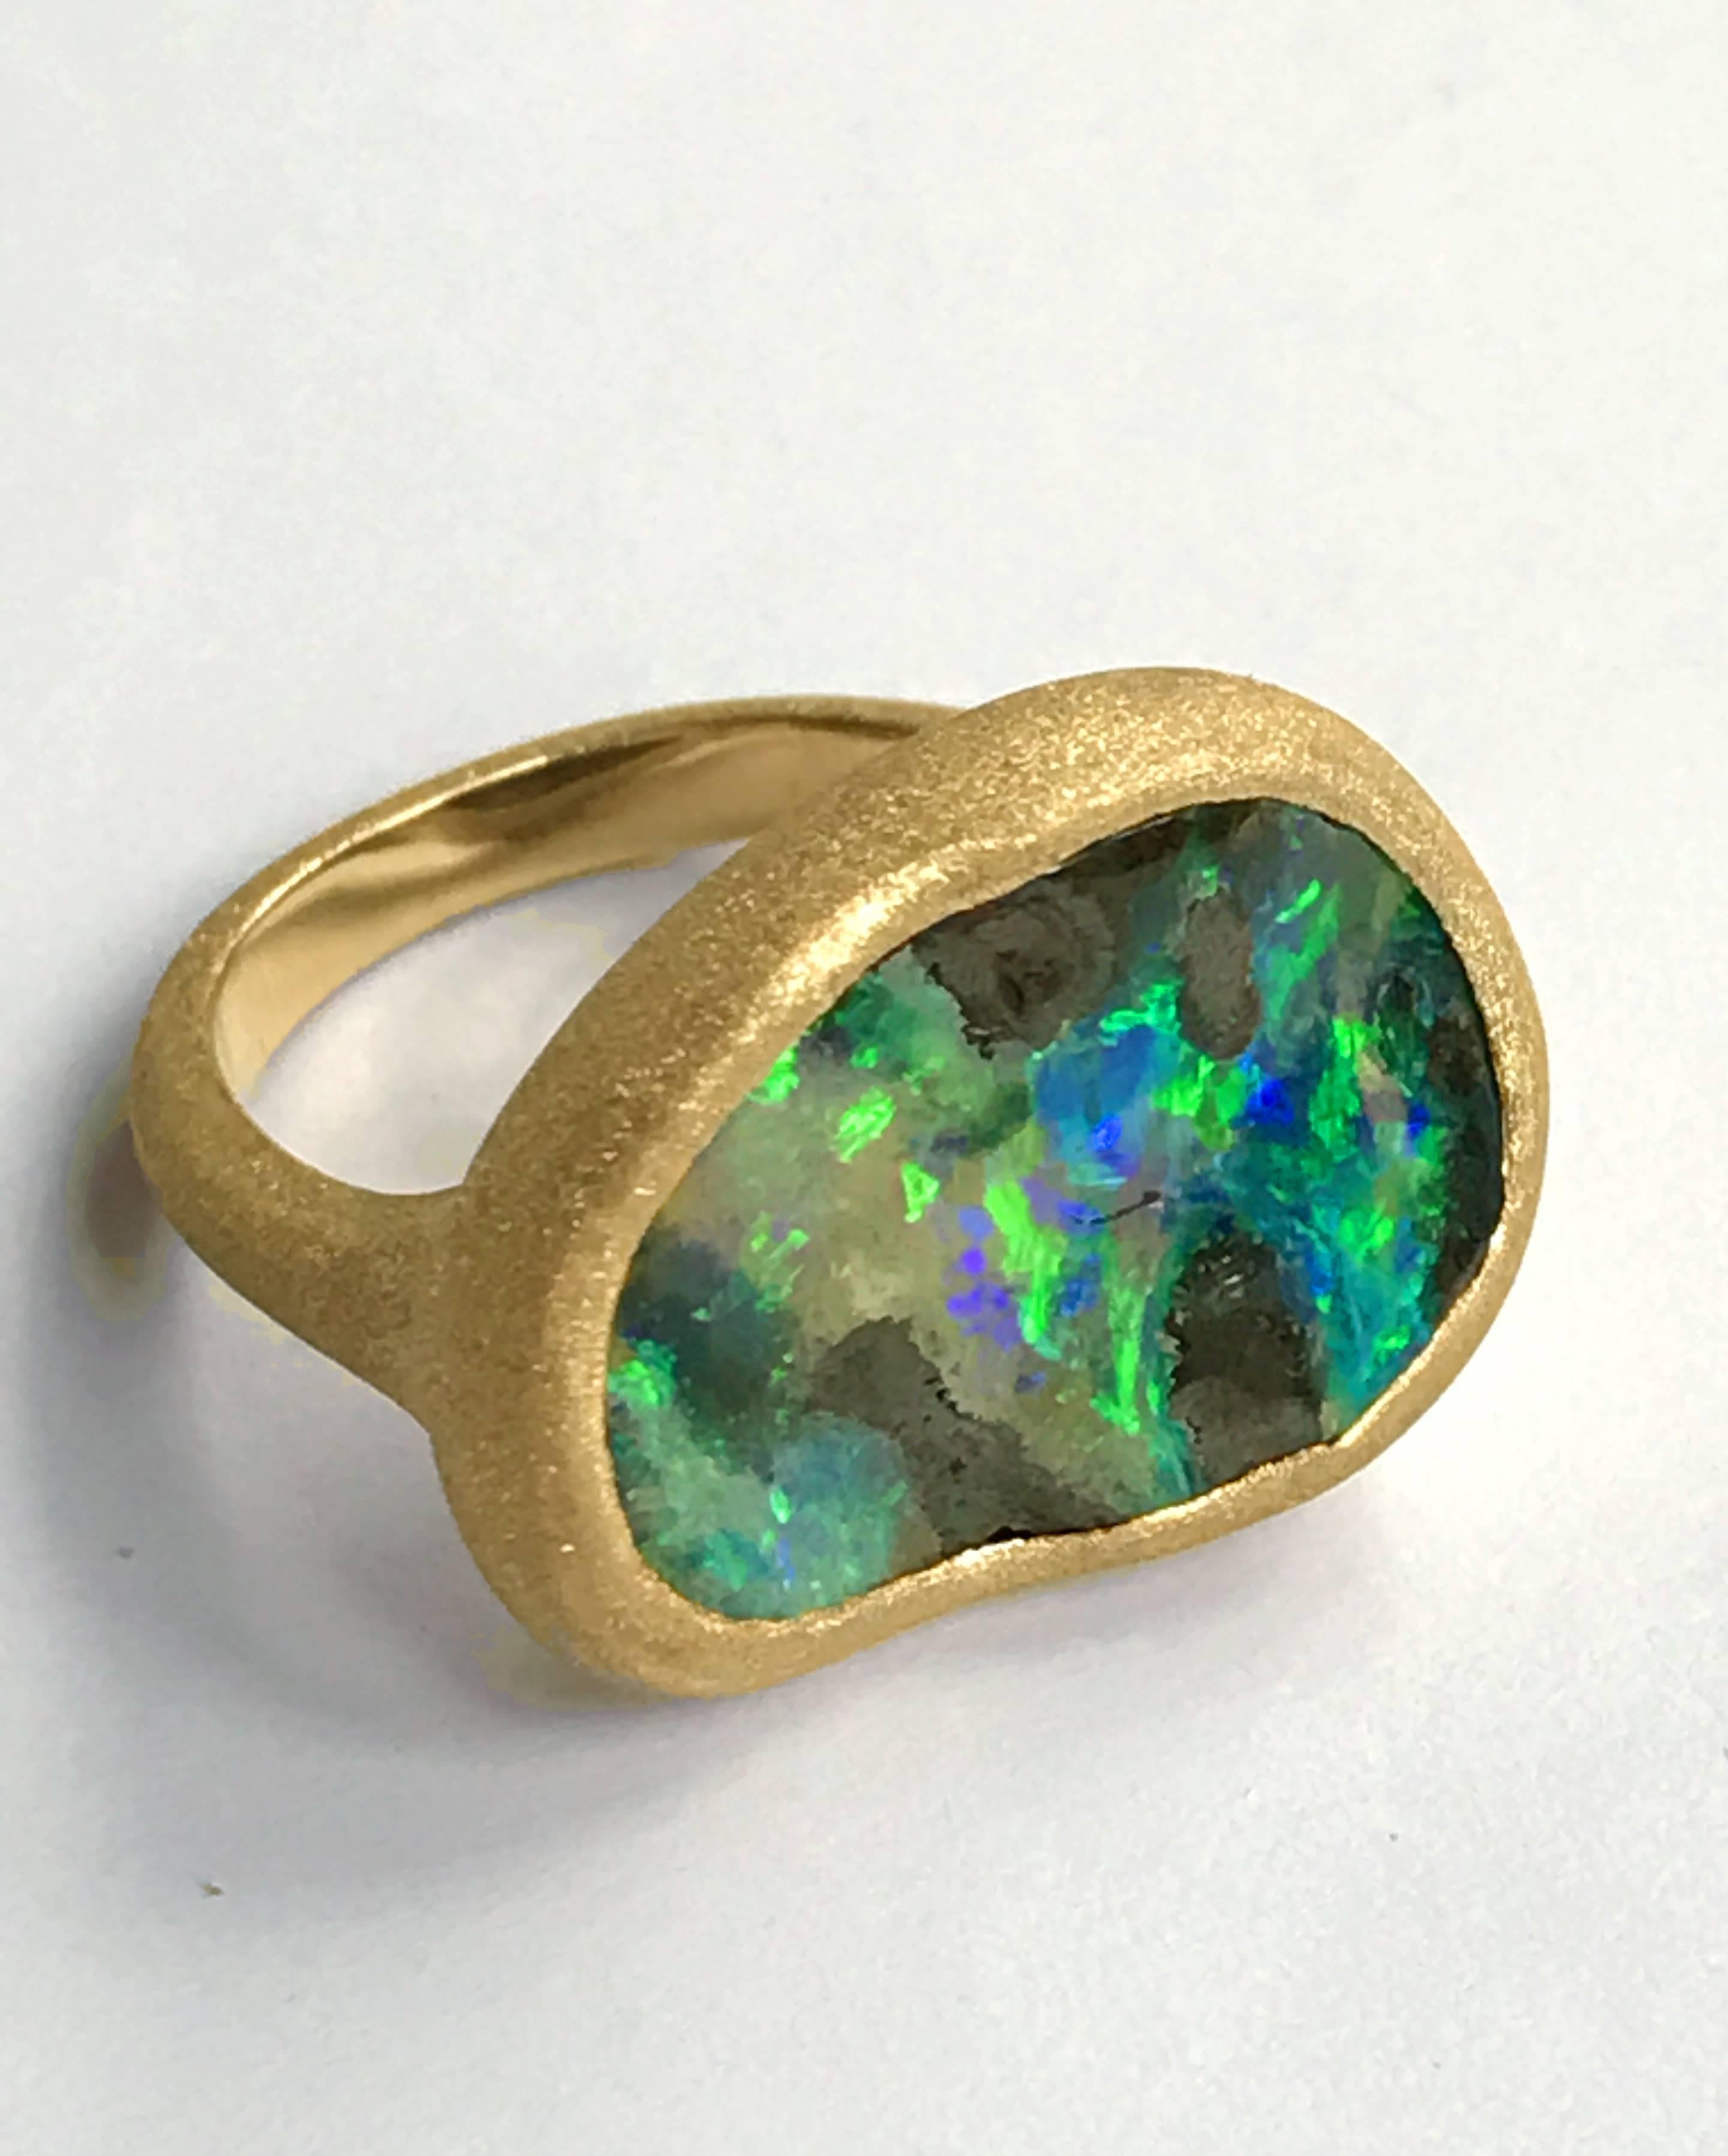 Dalben design One of a kind 18k yellow gold handmade engraved satin finishing ring with a 11,7 carat bezel-set deep Australian Boulder Opal. 
Ring size 7 1/4 - EU 55 re-sizable to most finger sizes. 
Bezel setting dimension: width 23,2 mm, height